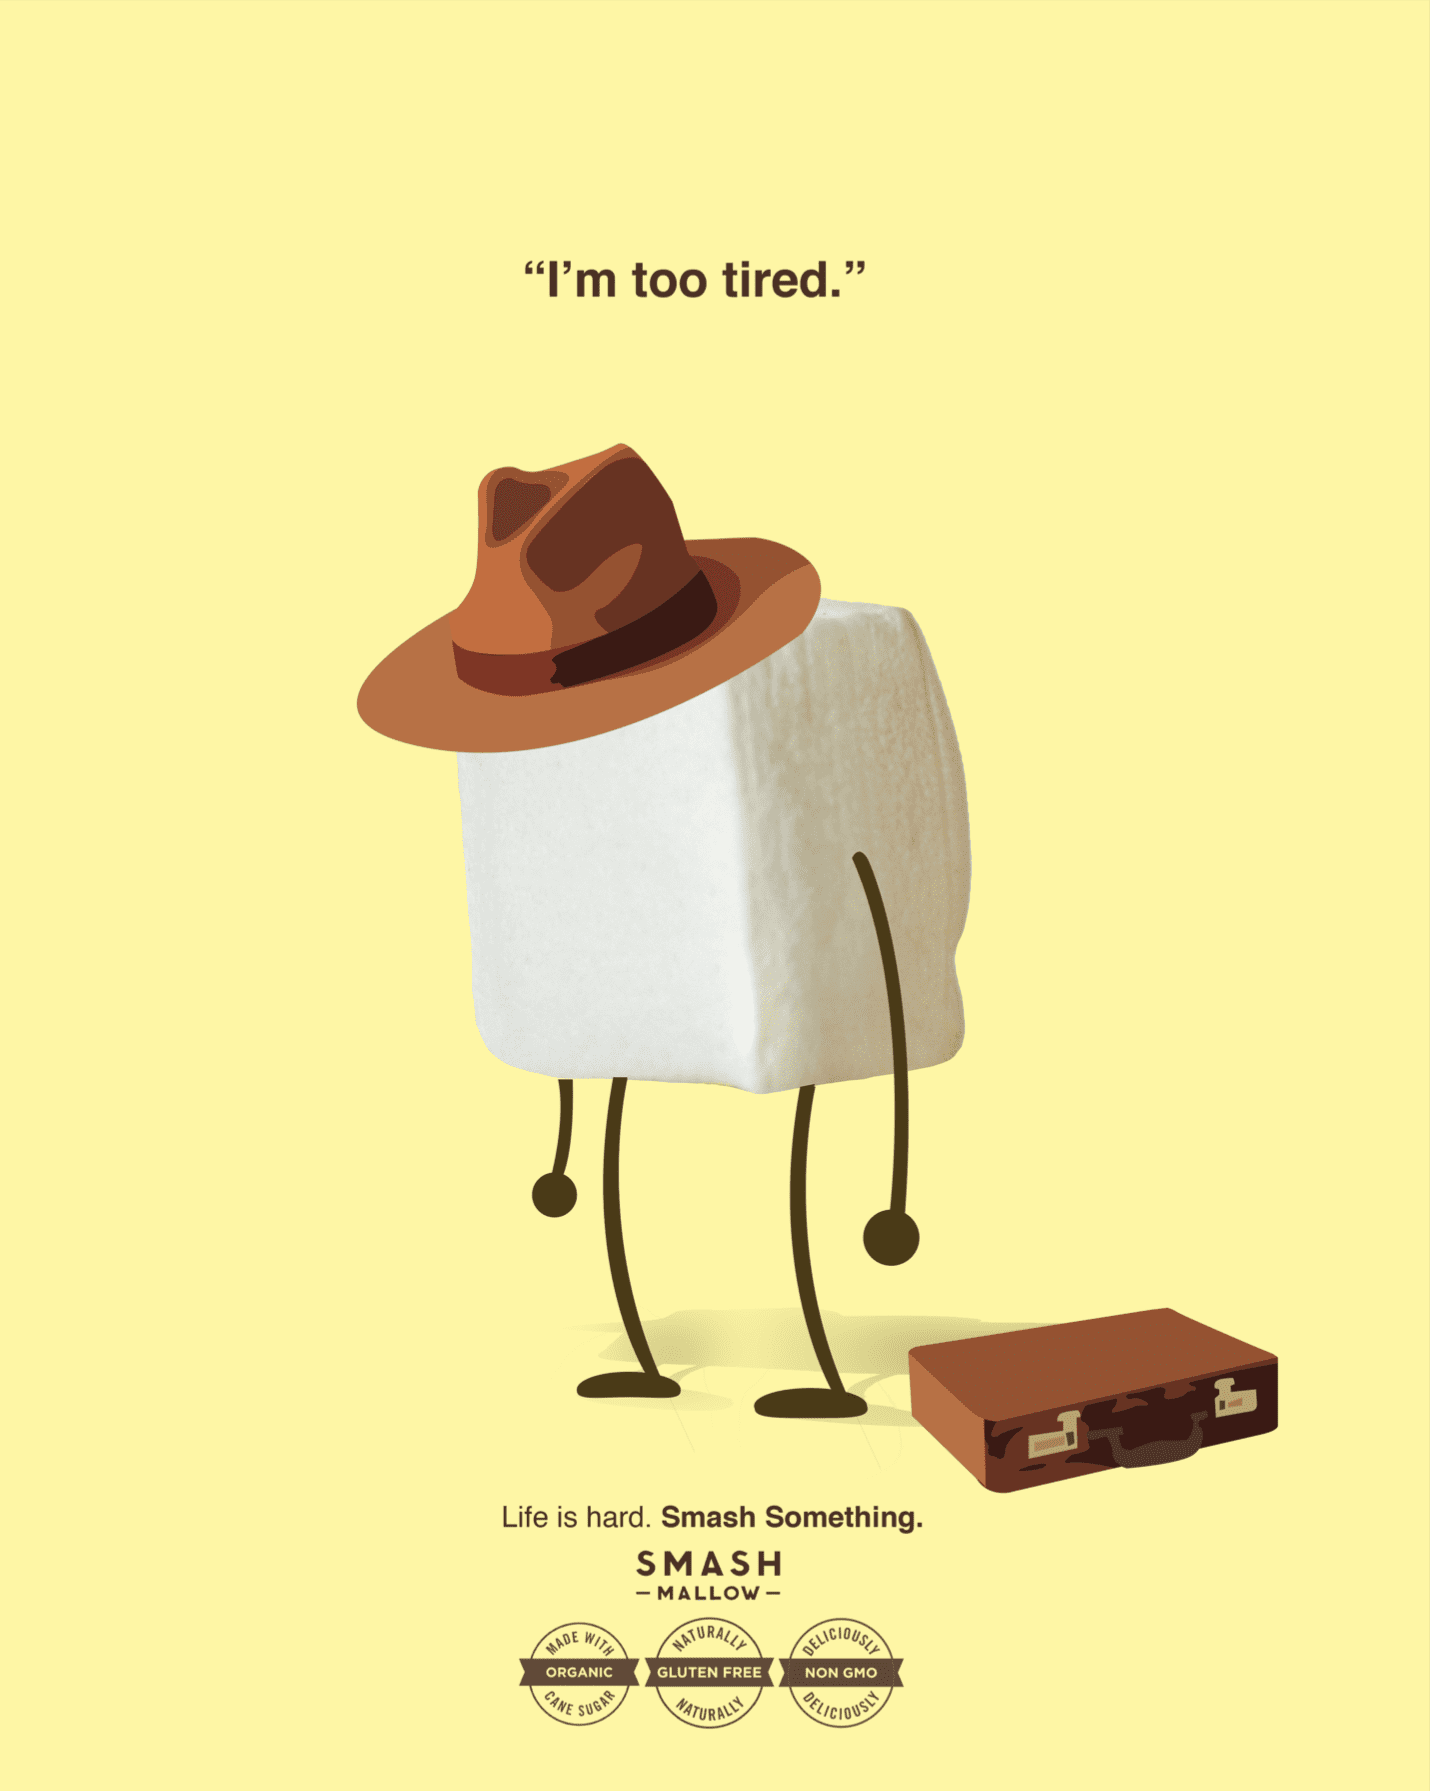 Advertisement of Smash Mallow marshmallows. Cube marshmallow with a suitcase, arms, legs, and a hat on a yellow background. Text says "I'm too tired"